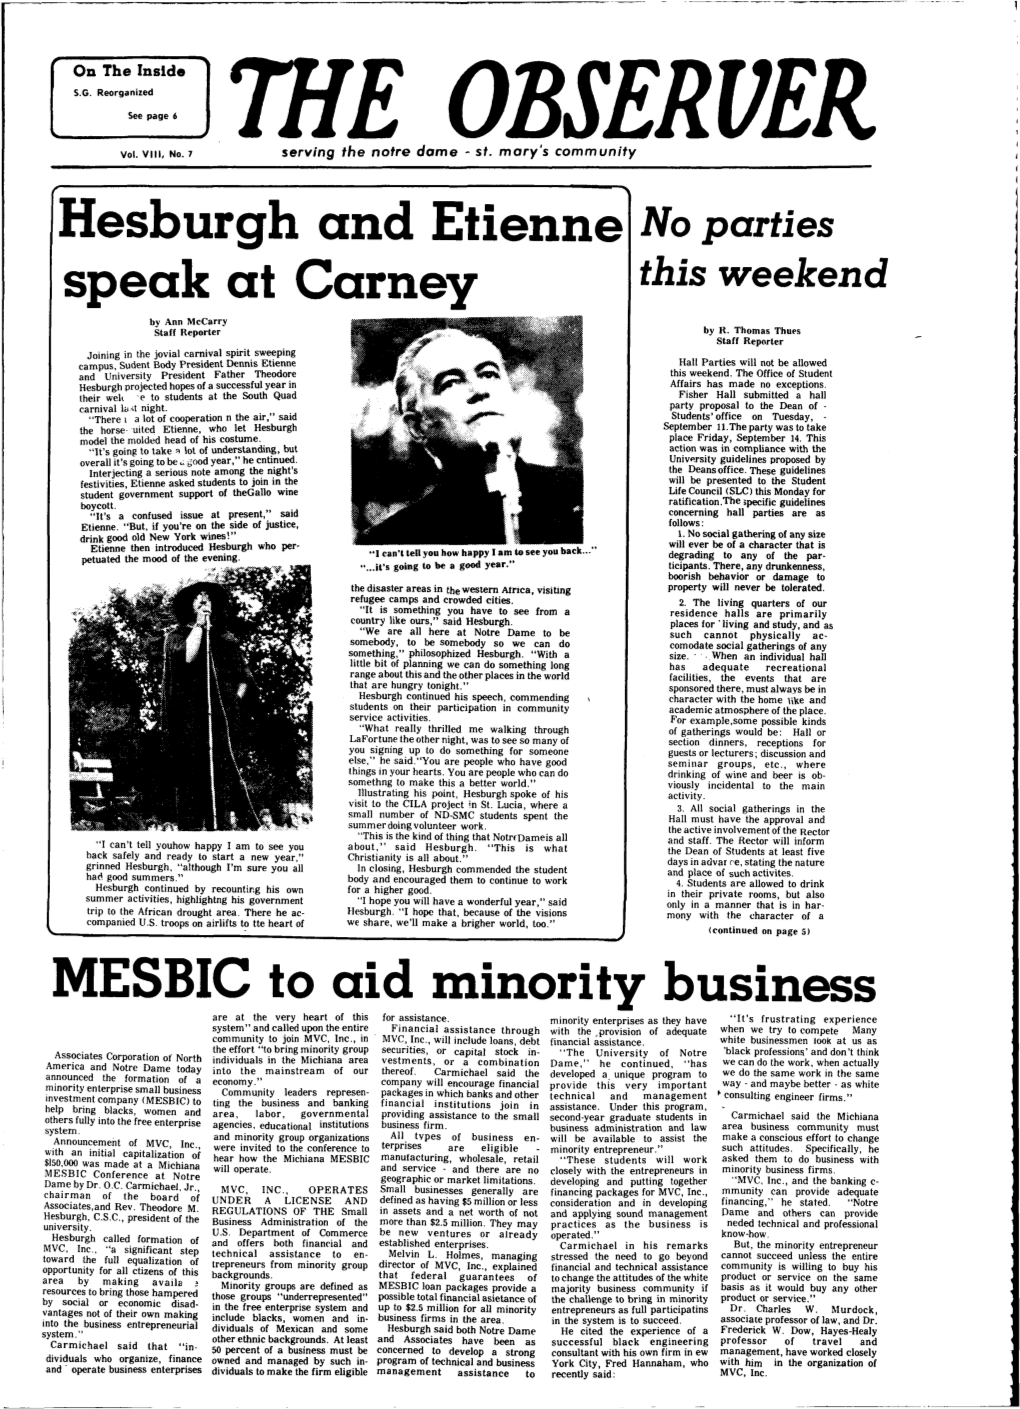 Hesburgh and Etienne No Parties Speak at Carney MESBIC to Aid